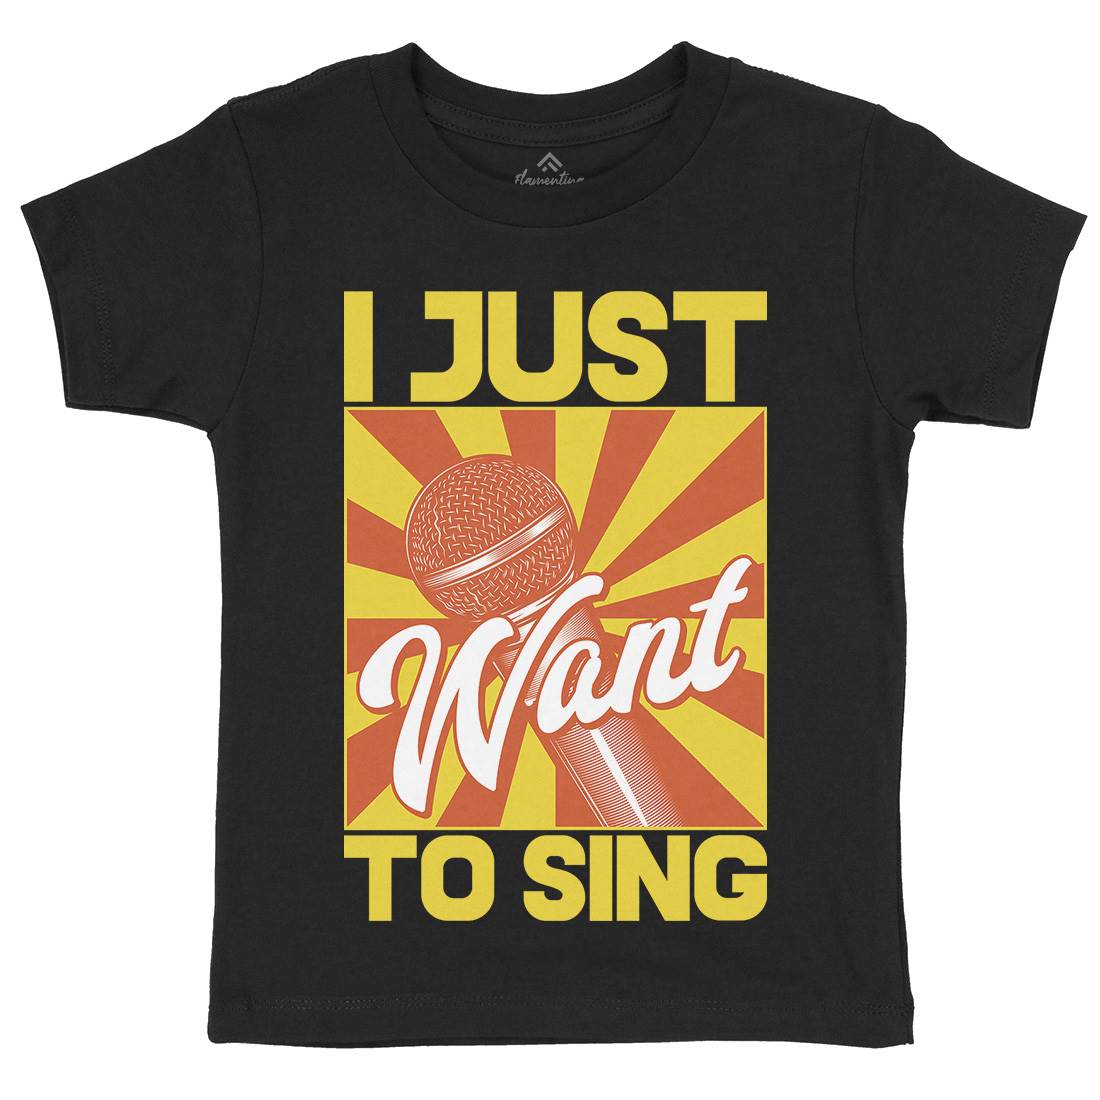 Want To Sing Kids Crew Neck T-Shirt Music C866